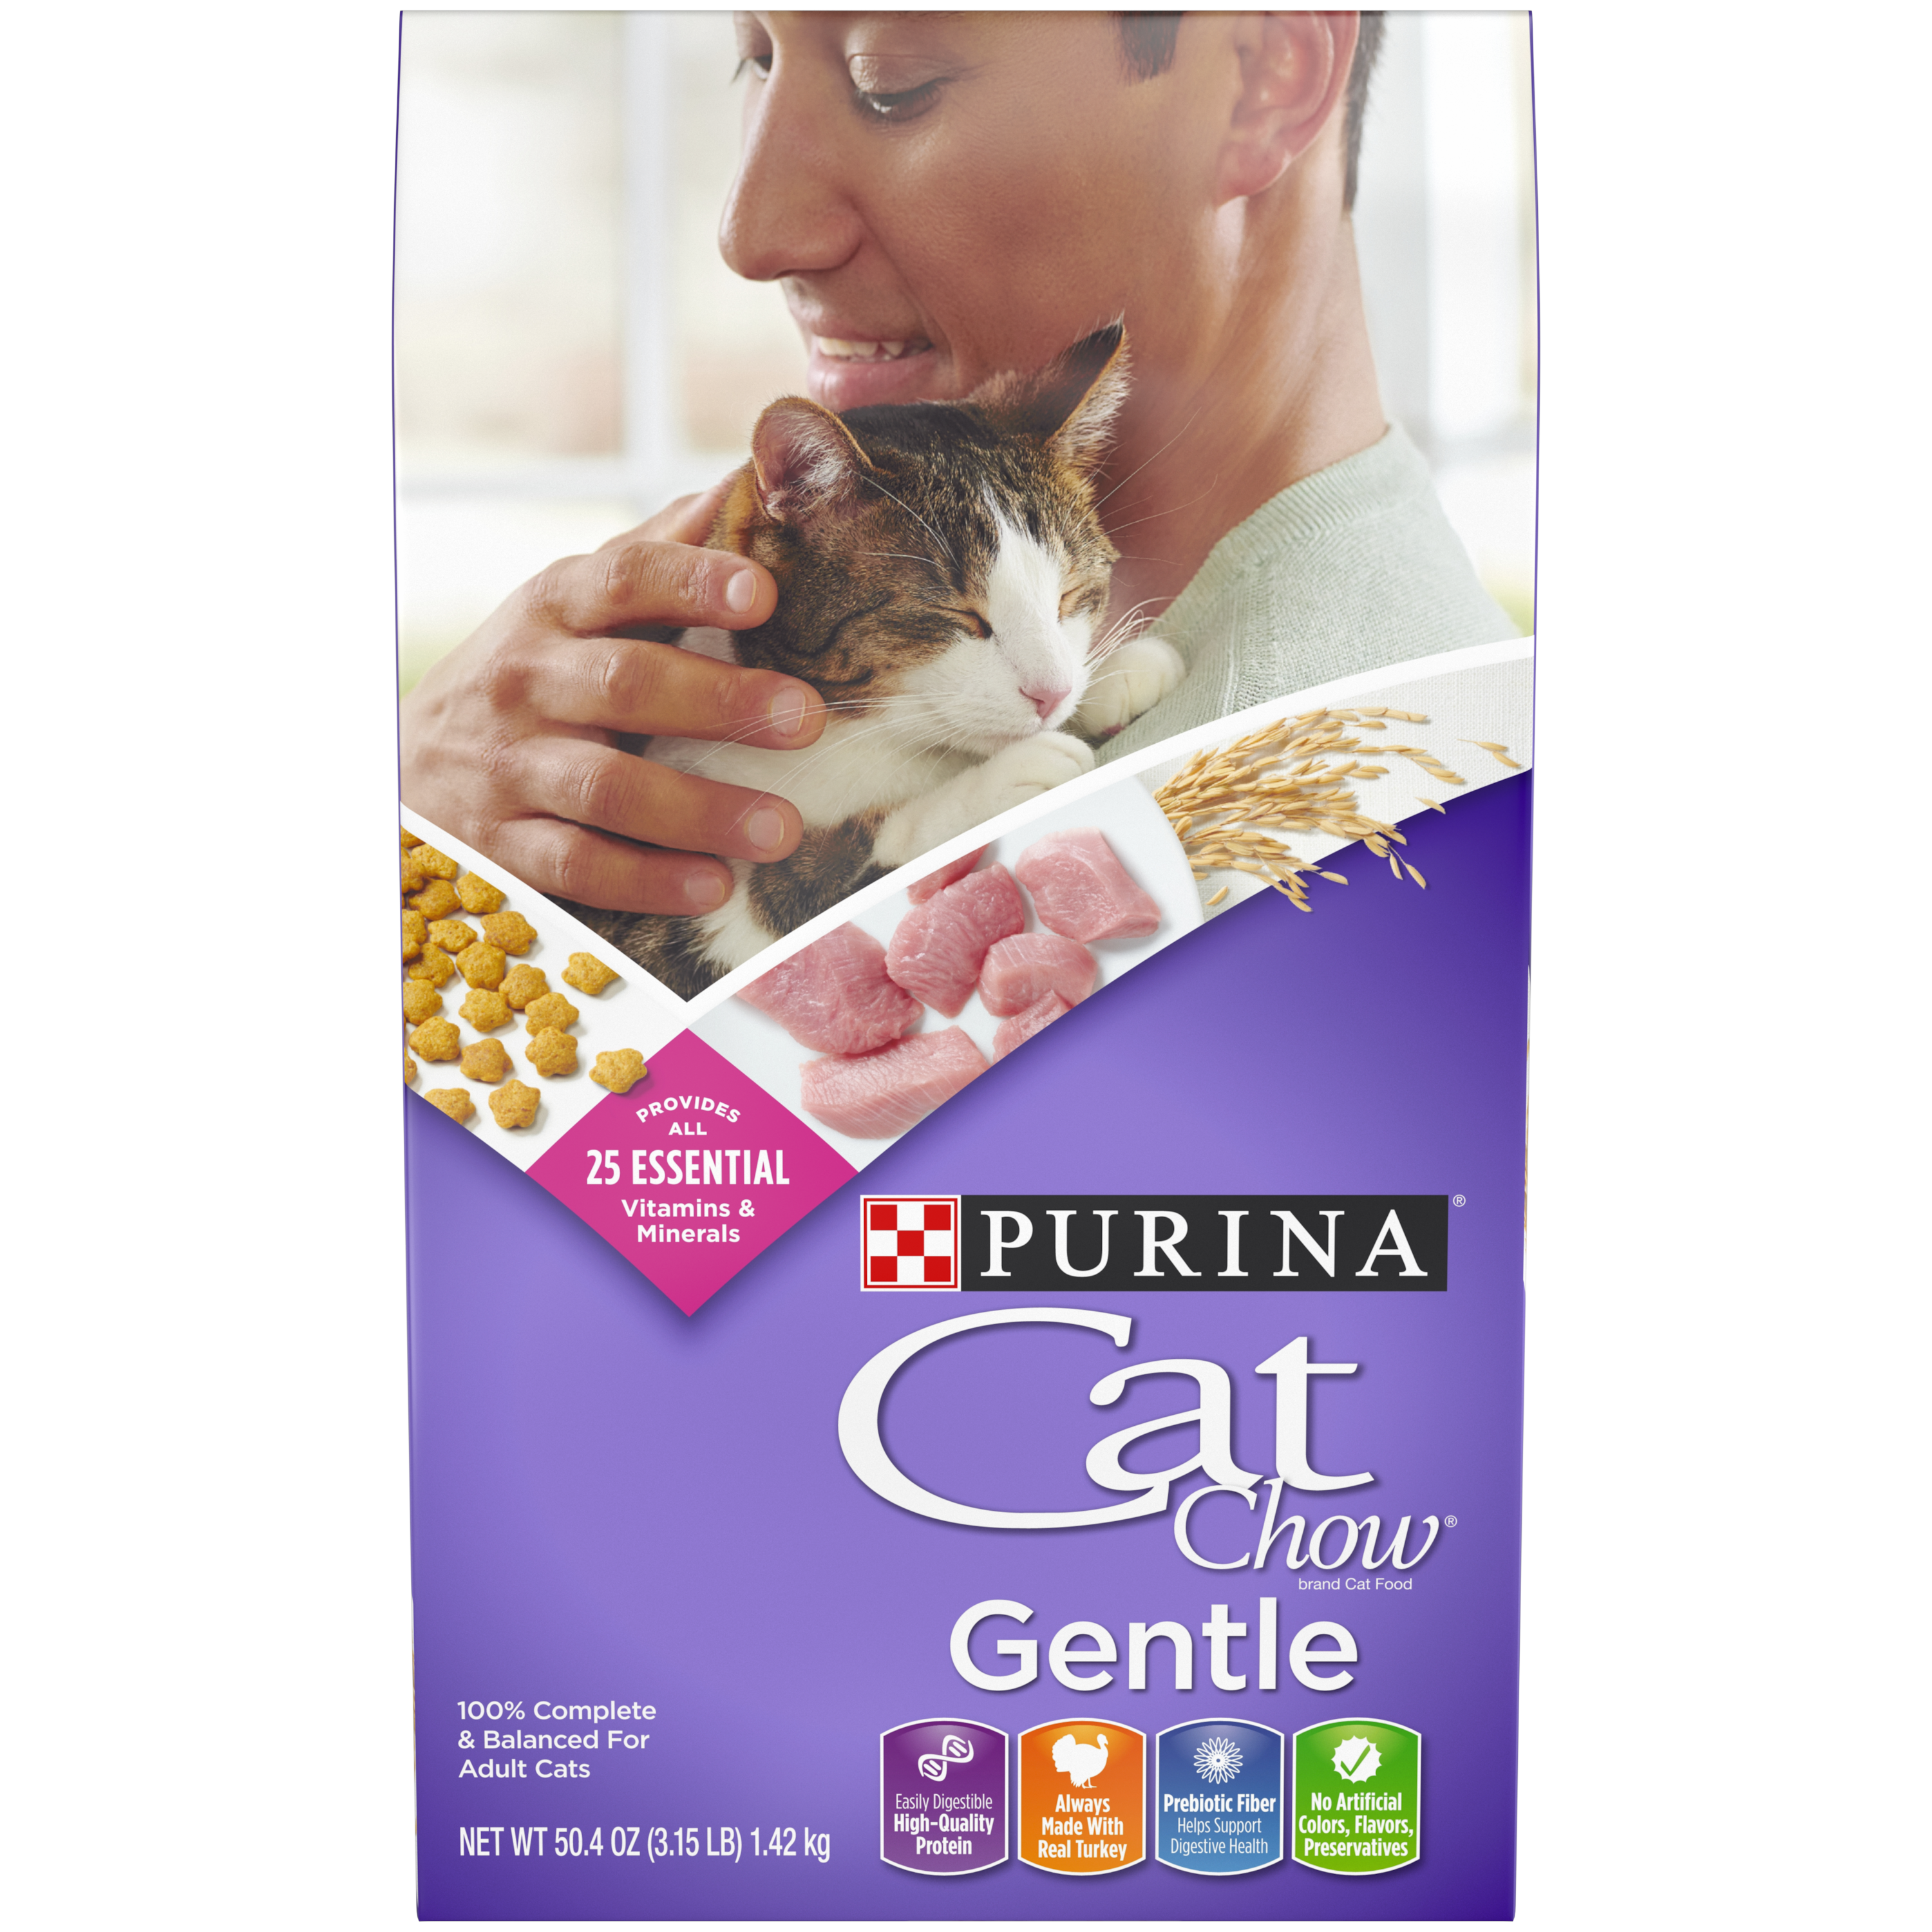 Purina Cat Chow Sensitive Stomach Dry Cat Food, Gentle, 3 ...